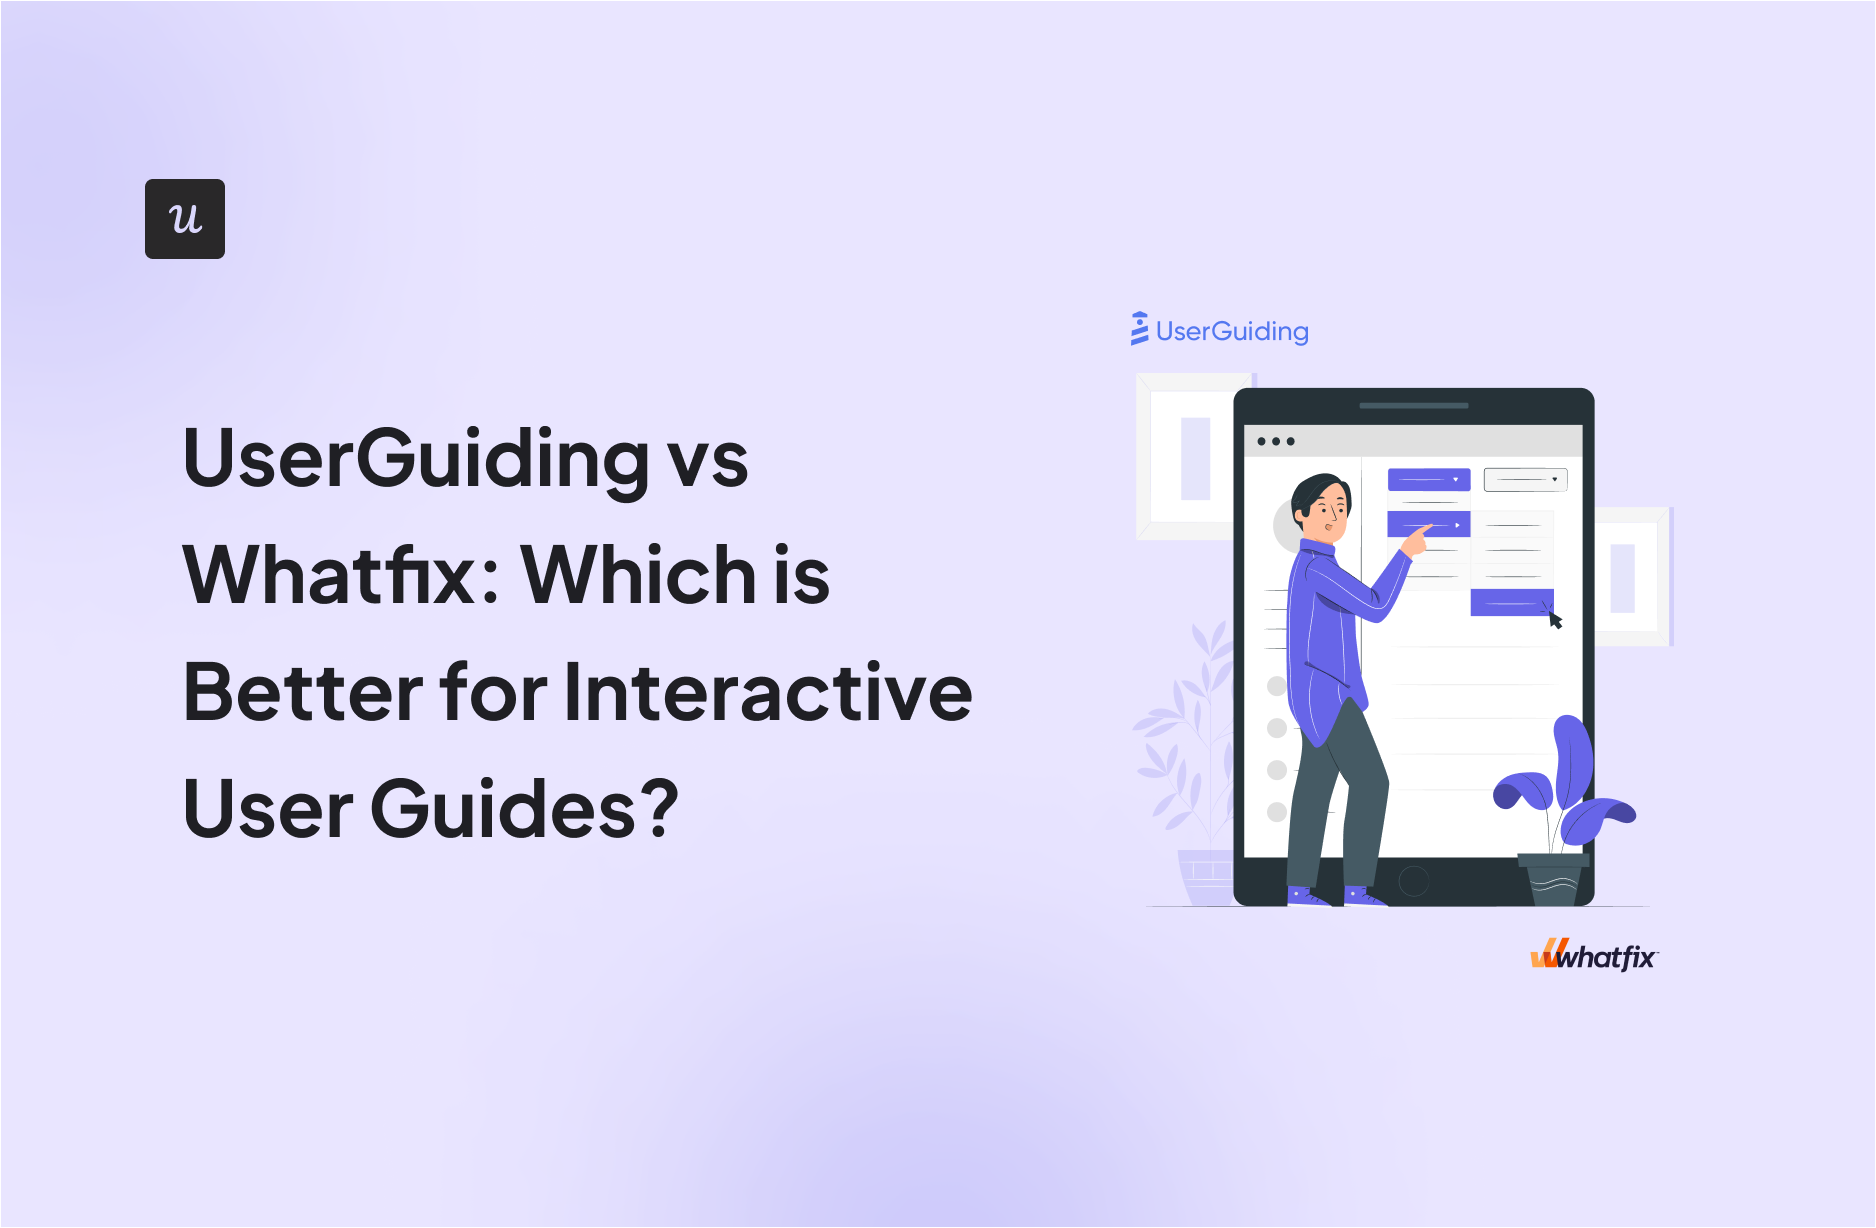 UserGuiding vs Whatfix: Which is Better for Interactive User Guides?